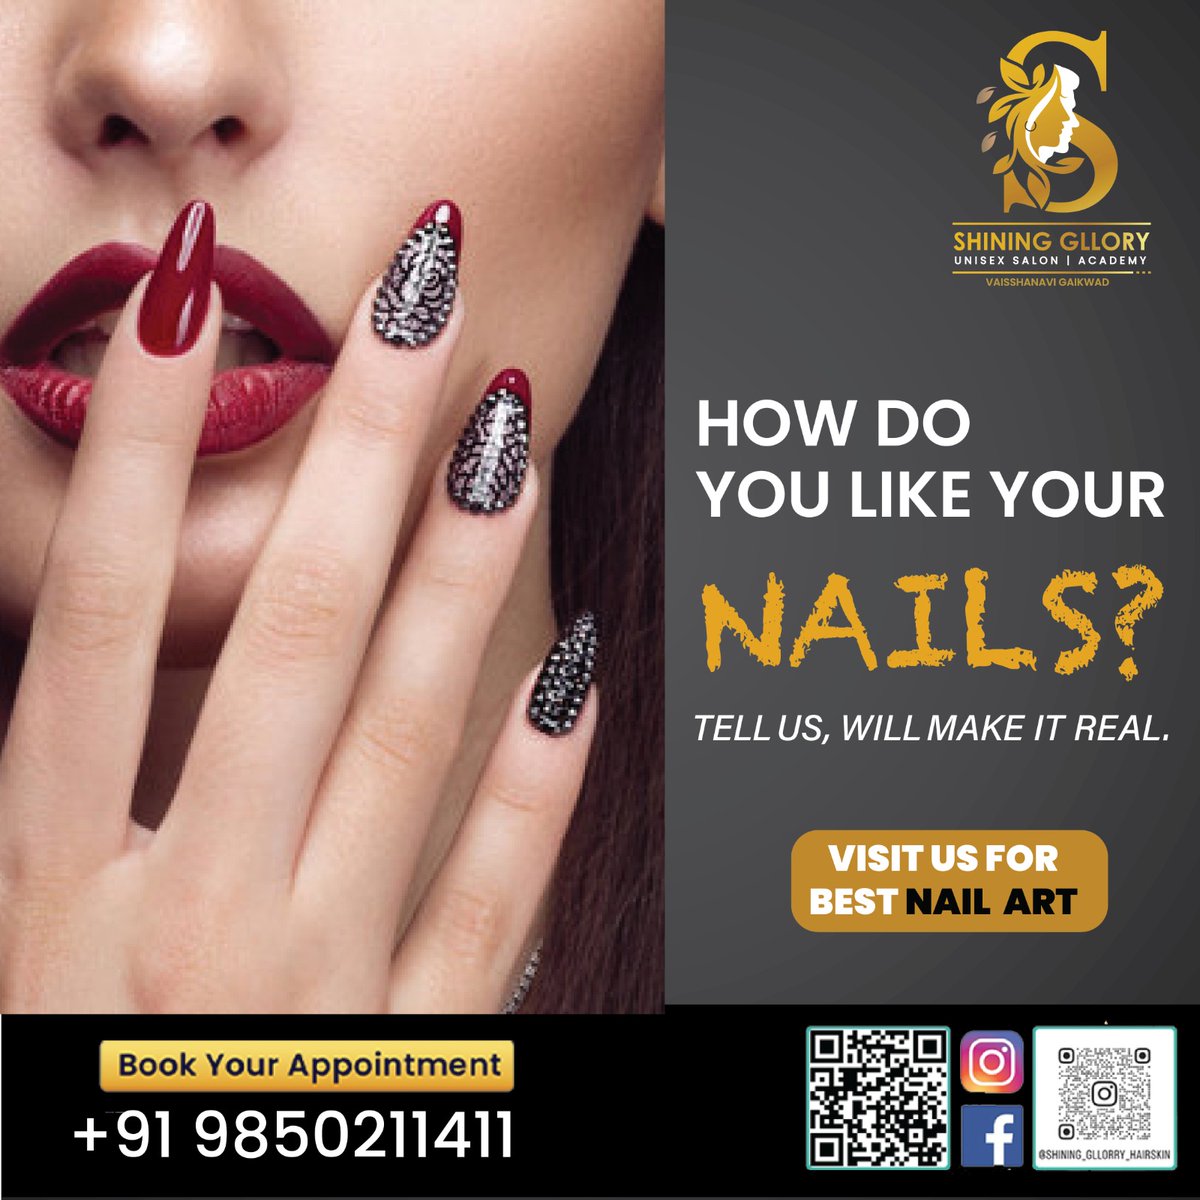 Looking for the best nail art in town? Visit Shining Glory Unisex Salon & Academy now! Our expert nail technicians will make your nail dreams come true. Book your appointment today! 💅

Address: Kothrud
Call: 98502 11411
#nail #nailart #nailartsalon #nailexpert #nailartspecialist